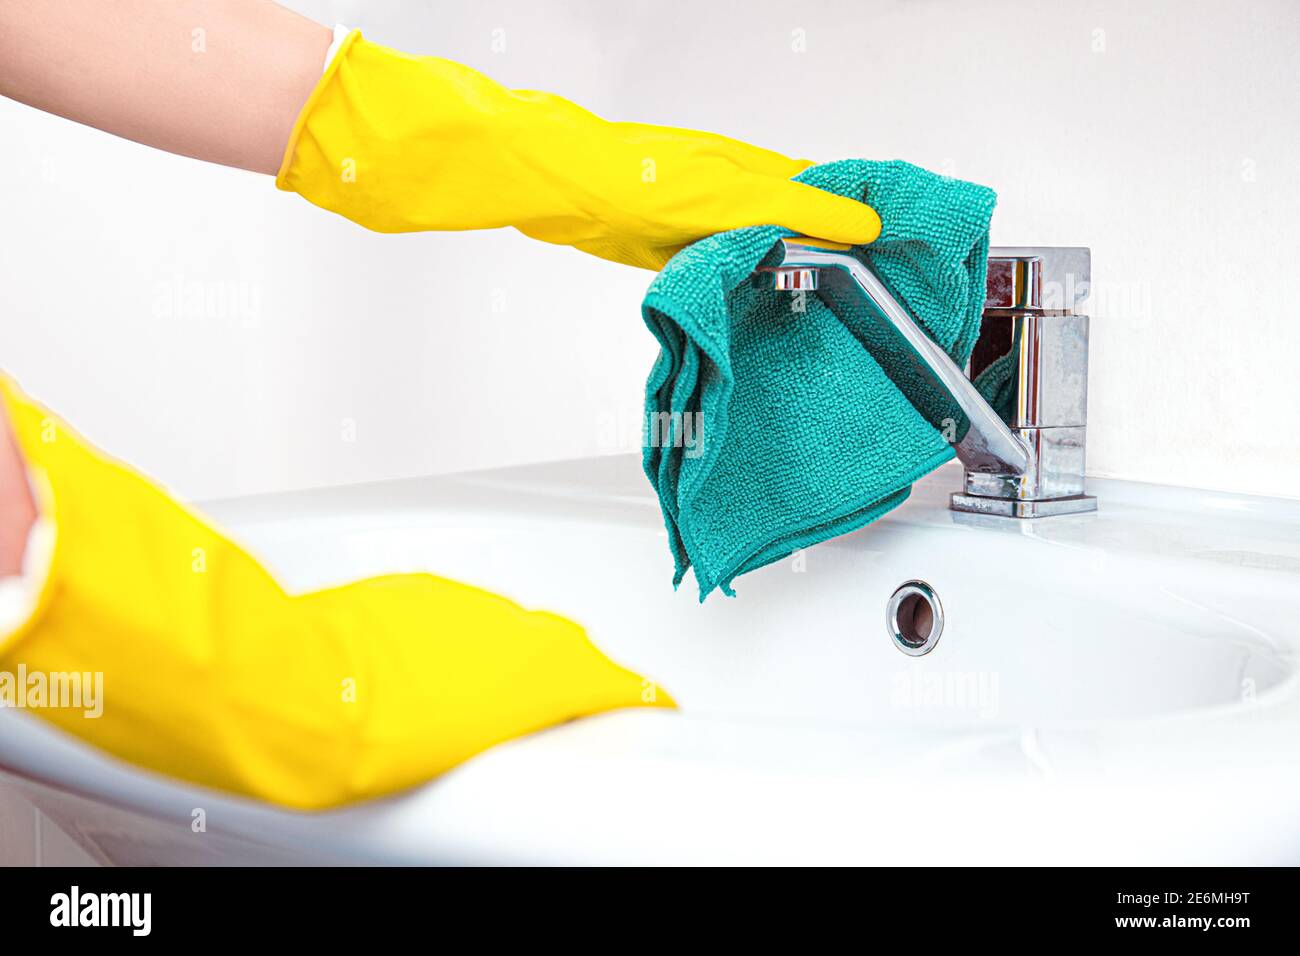 Clean up your house. Woman doing chores in bathroom, hands in yellow gloves cleaning of water tap, steel sink witth blue rag and detergent spray Stock Photo